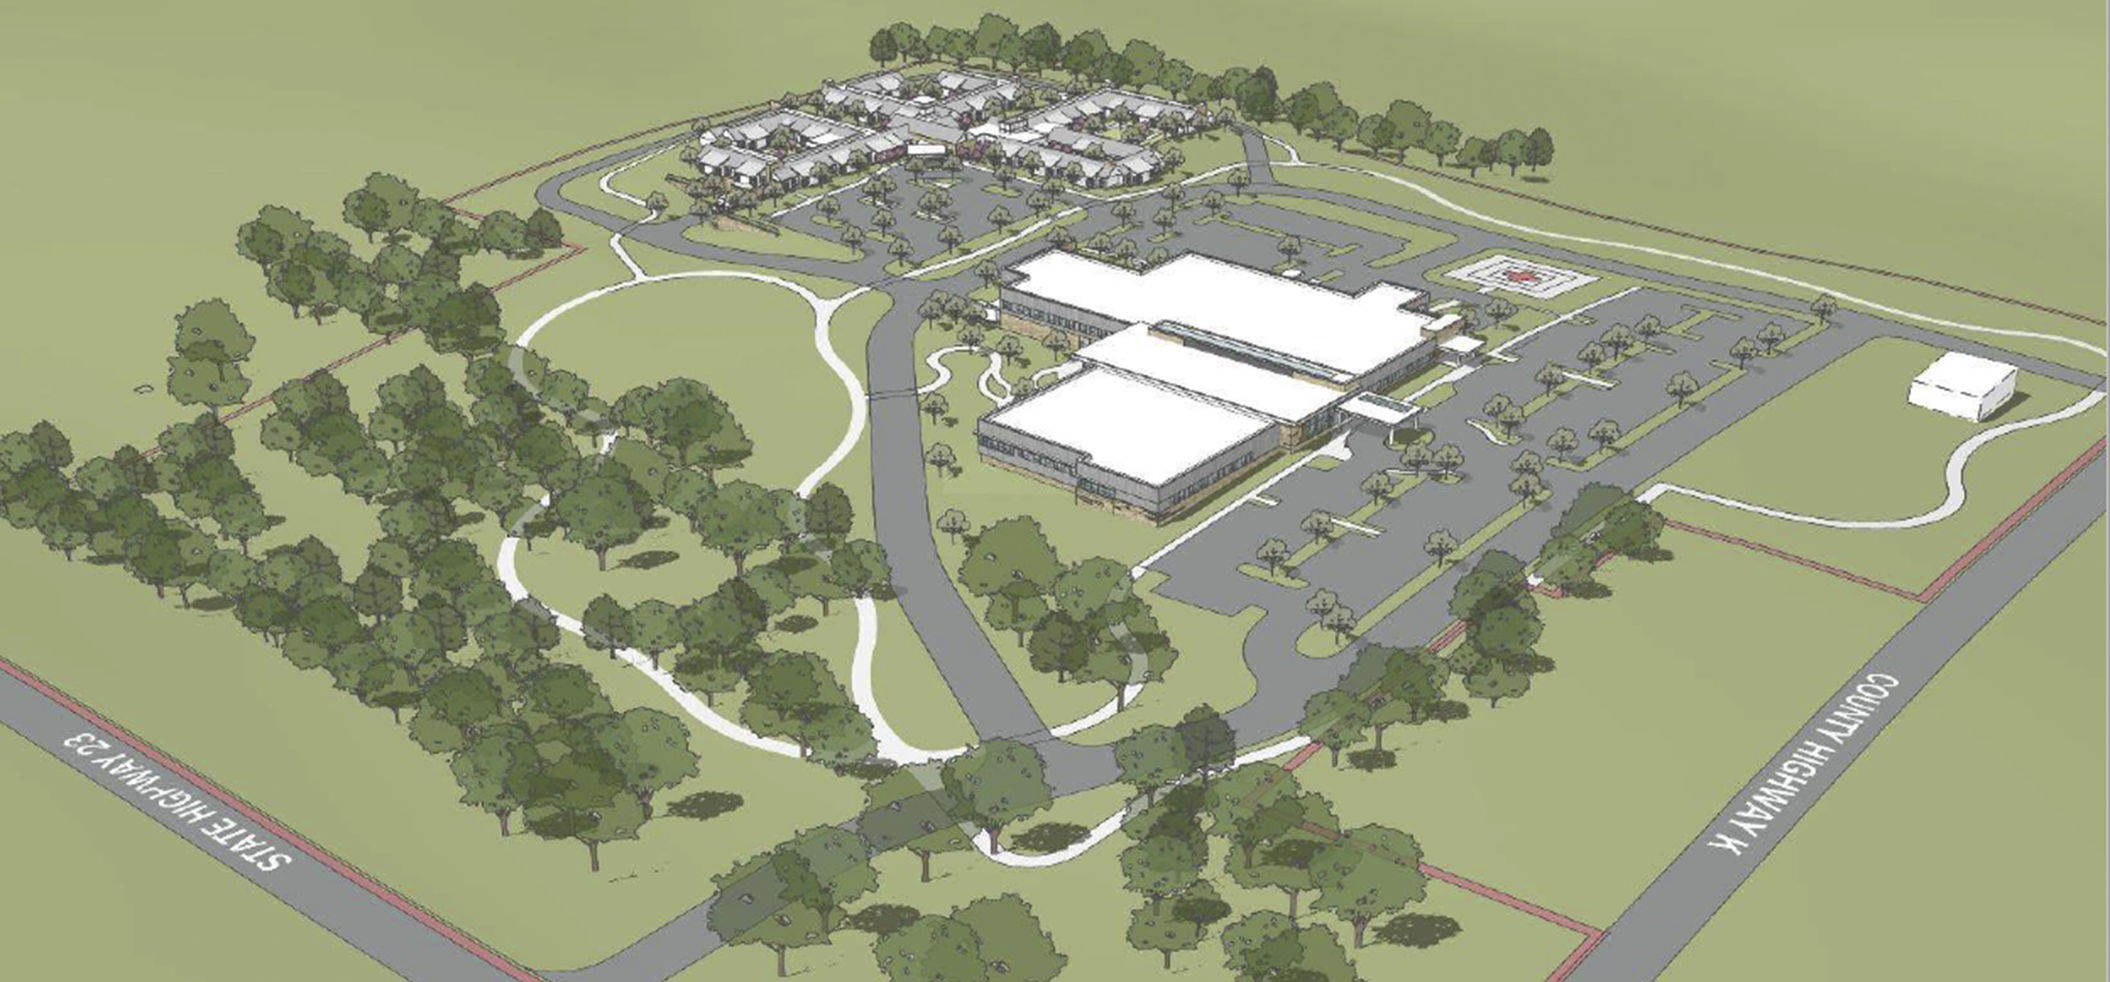 Renderings of a new Lafayette County hospital and nursing home complex, which would be located at the southwest corner of Lafayette County K and Wisconsin 23 in Darlington Township. Courtesy of Fehr Graham. PHOTO CREDIT: Fehr Graham